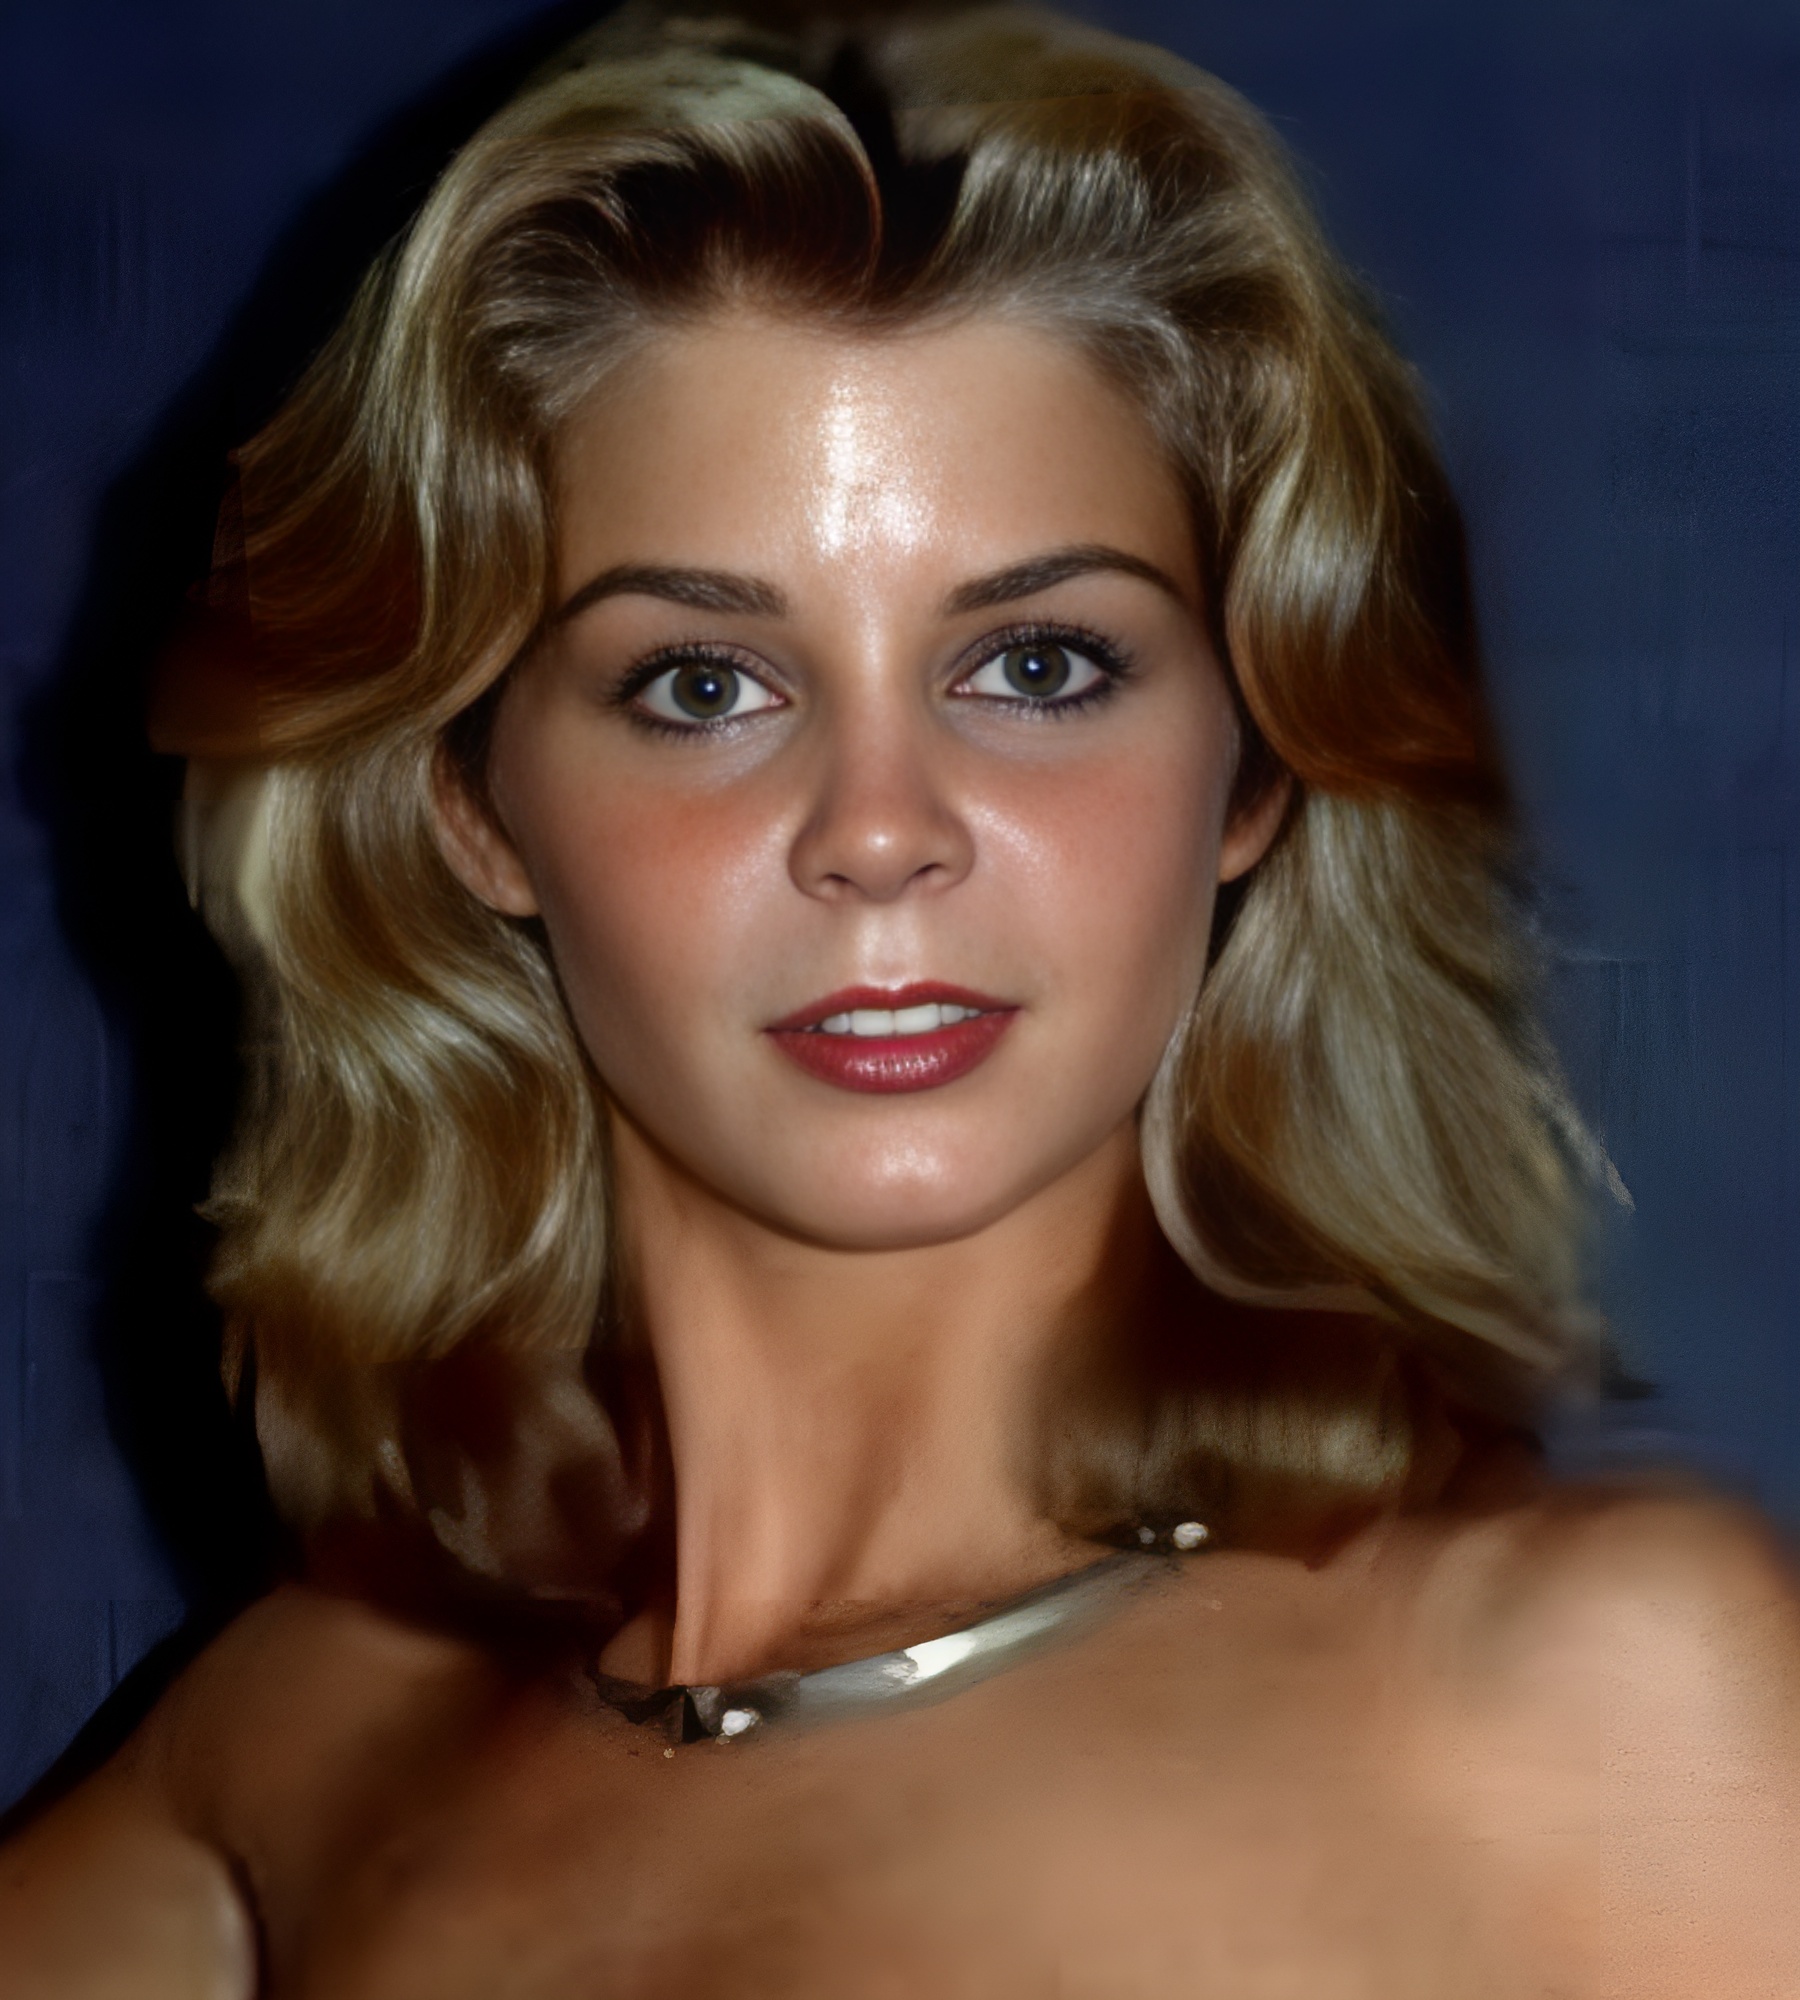 Kristine Debell (Actress) Height, Weight, Wiki, Biography, Boyfriend, Age, Career and More